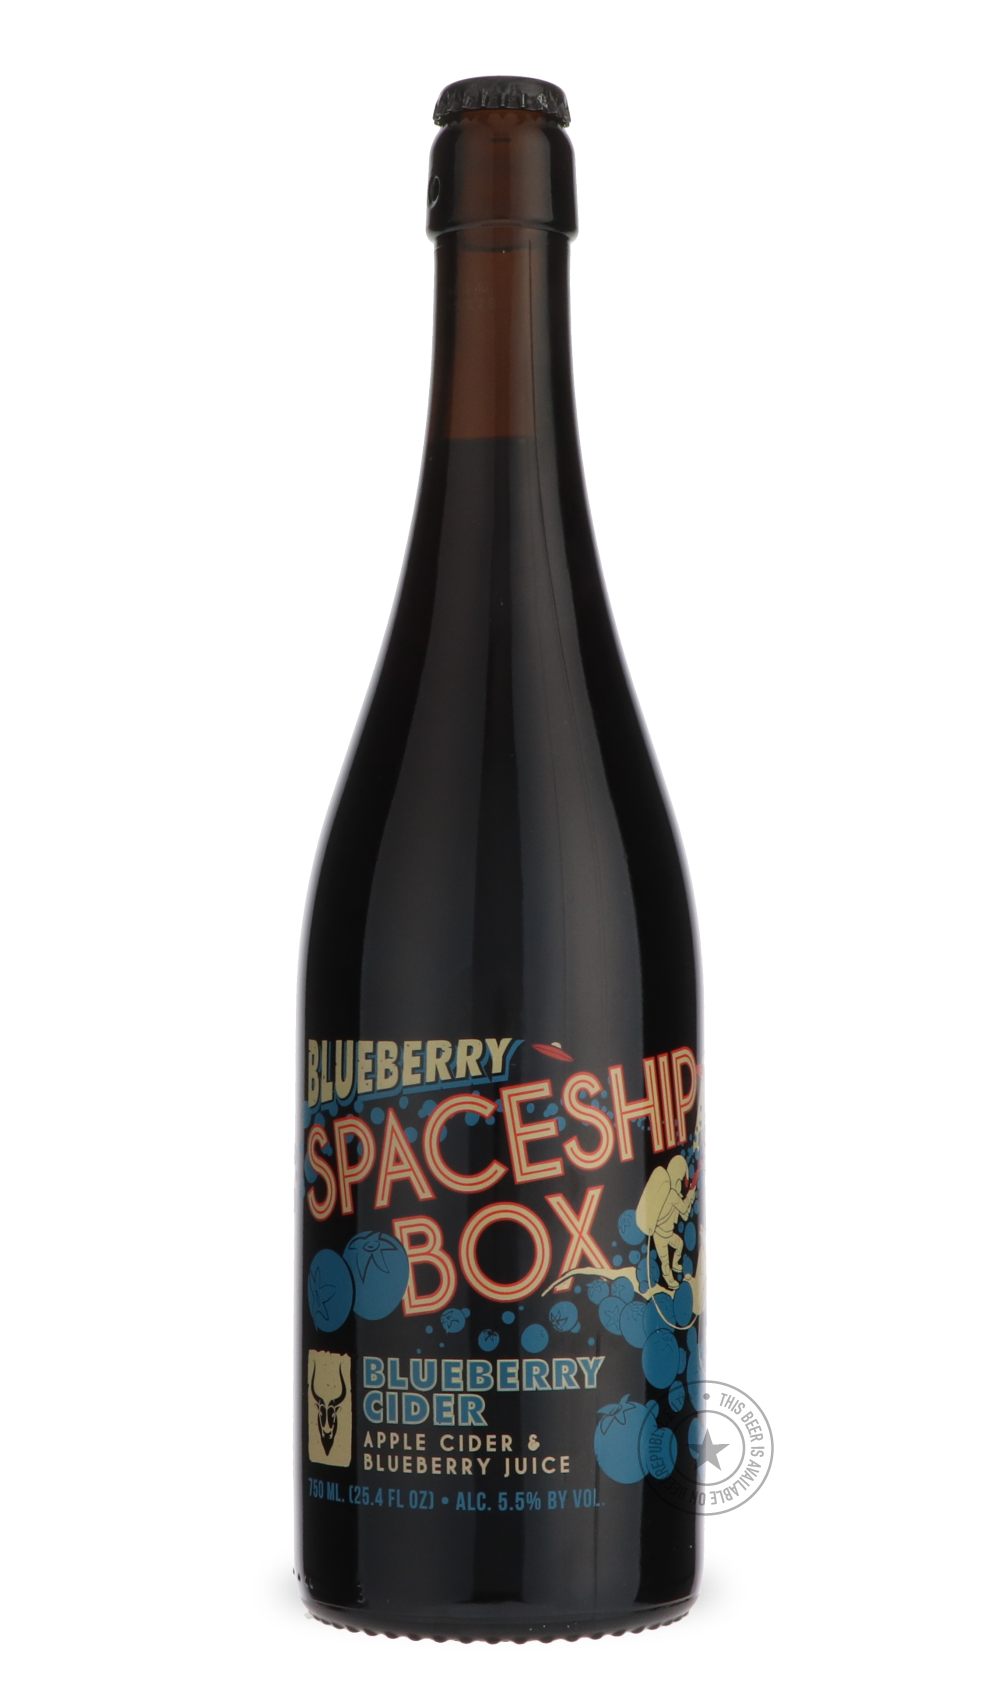 -Superstition Meadery- Blueberry Spaceship Box-Specials- Only @ Beer Republic - The best online beer store for American & Canadian craft beer - Buy beer online from the USA and Canada - Bier online kopen - Amerikaans bier kopen - Craft beer store - Craft beer kopen - Amerikanisch bier kaufen - Bier online kaufen - Acheter biere online - IPA - Stout - Porter - New England IPA - Hazy IPA - Imperial Stout - Barrel Aged - Barrel Aged Imperial Stout - Brown - Dark beer - Blond - Blonde - Pilsner - Lager - Wheat 